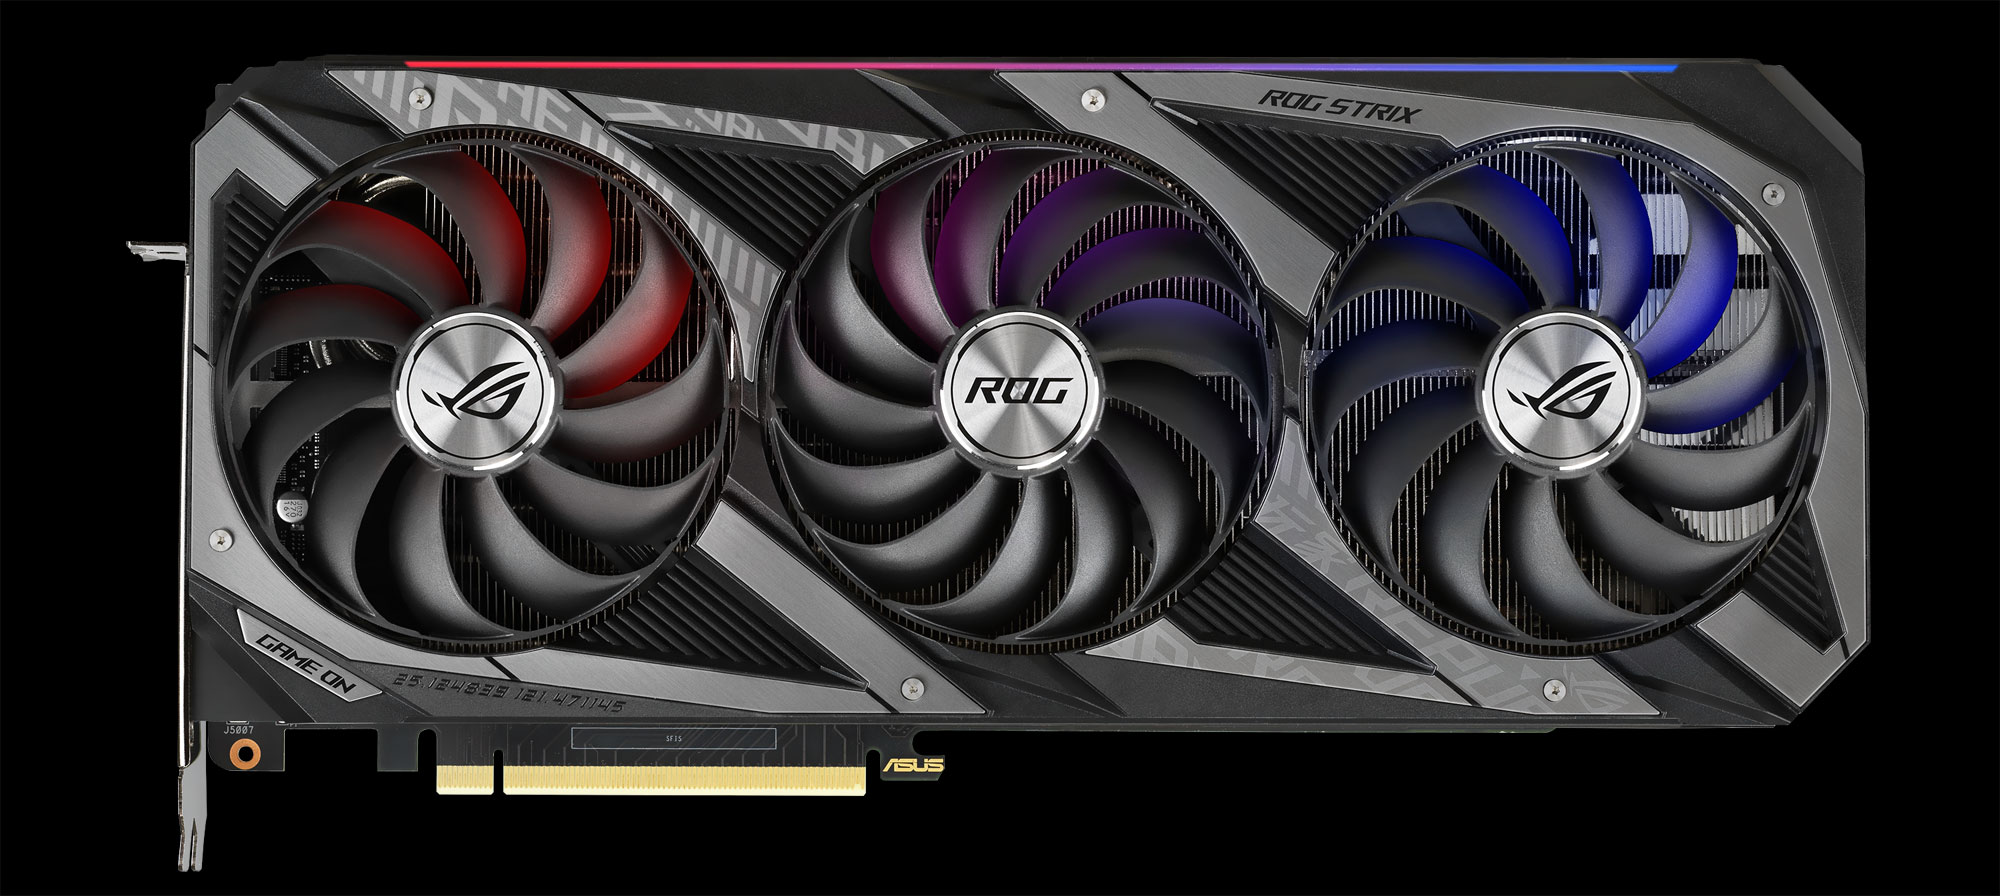 A photo of a triple-fan ROG Strix RTX 3080 graphics card on a black background.